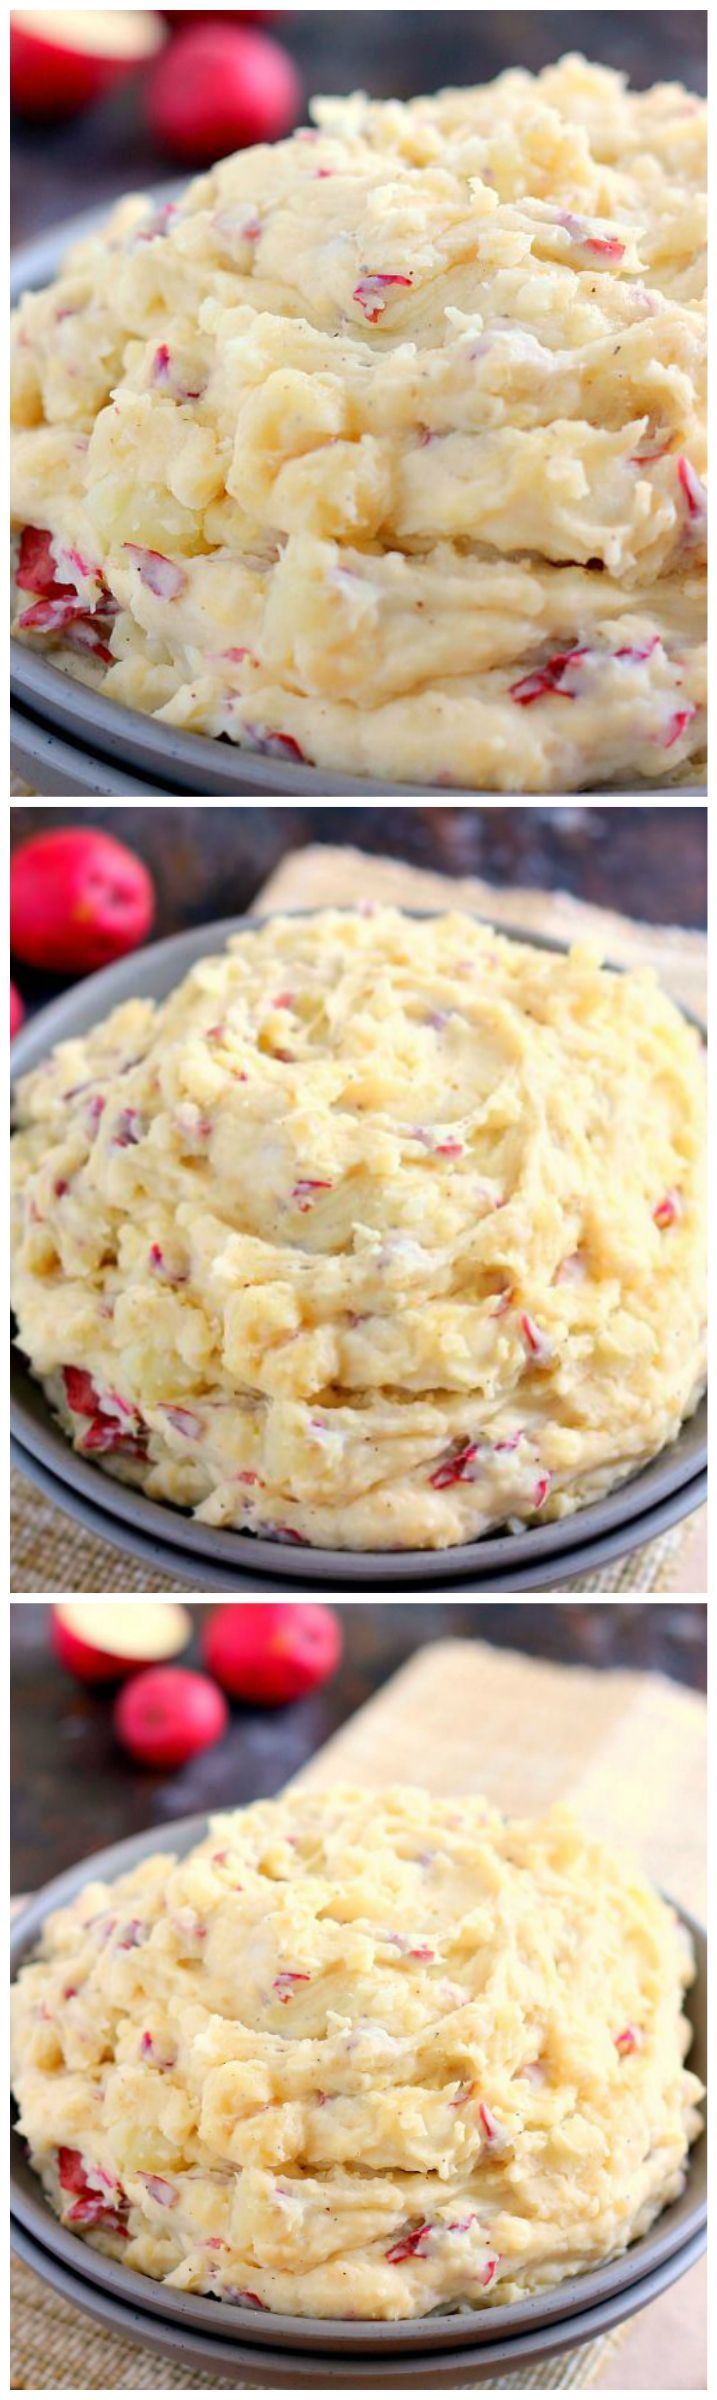 These Slow Cooker Garlic Parmesan Mashed Potatoes are creamy, flavorful, and contain just a few simple ingredients. The fresh